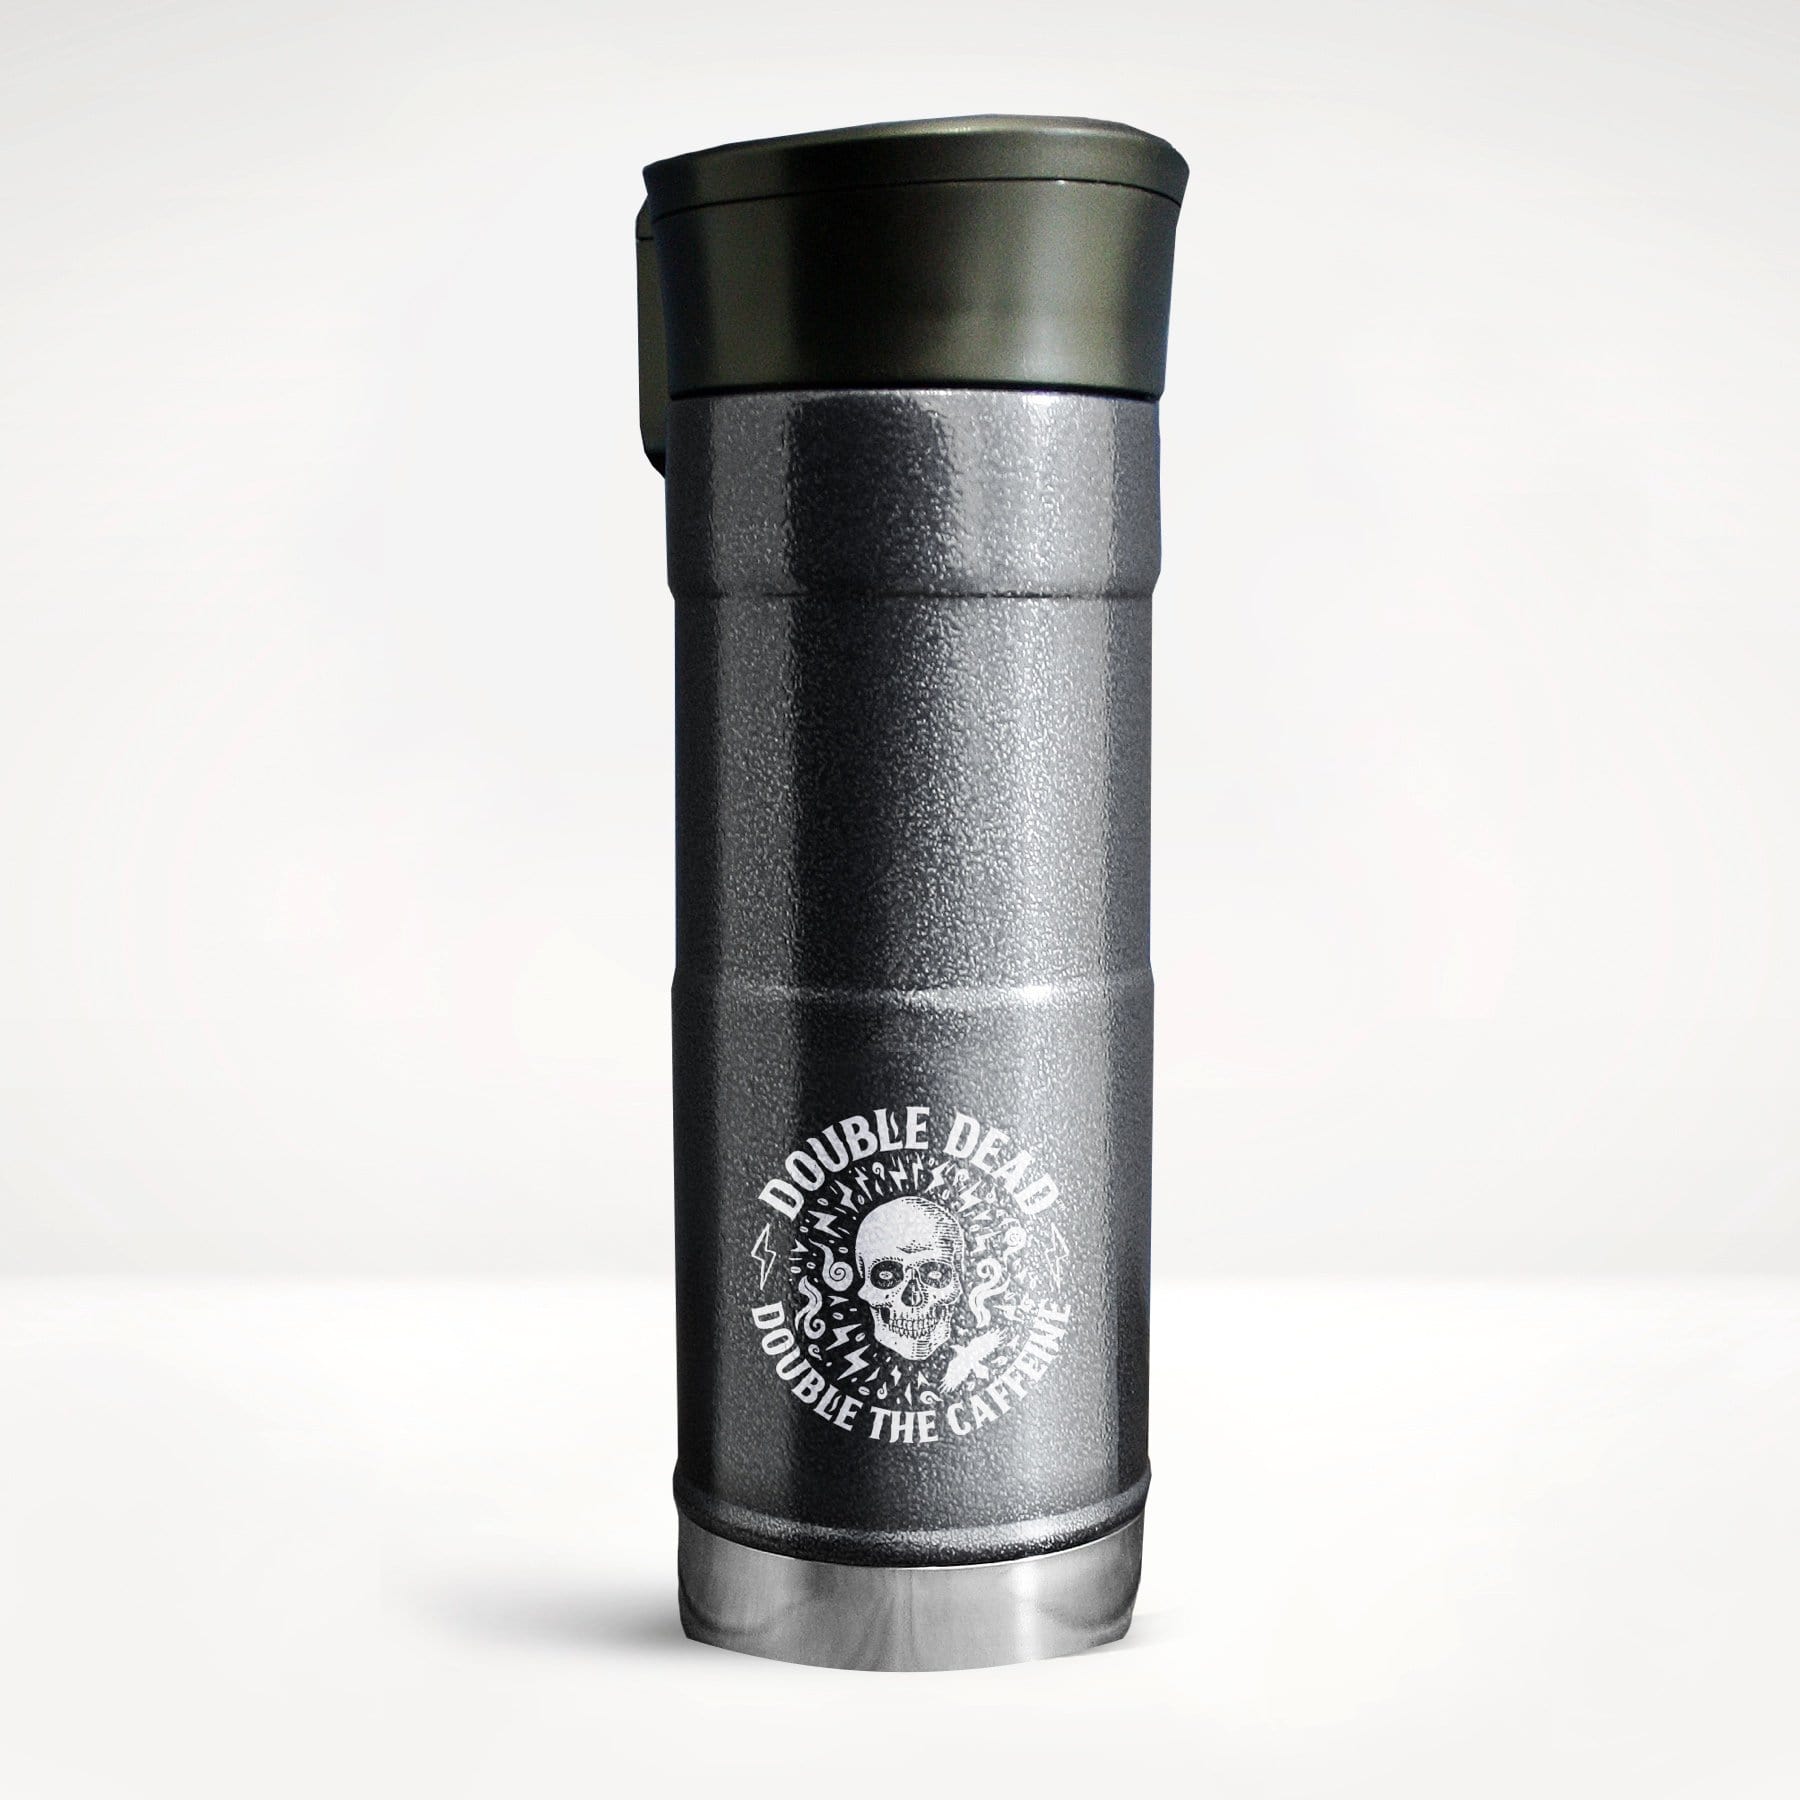 Double Dead® Stainless Steel Travel Tumbler